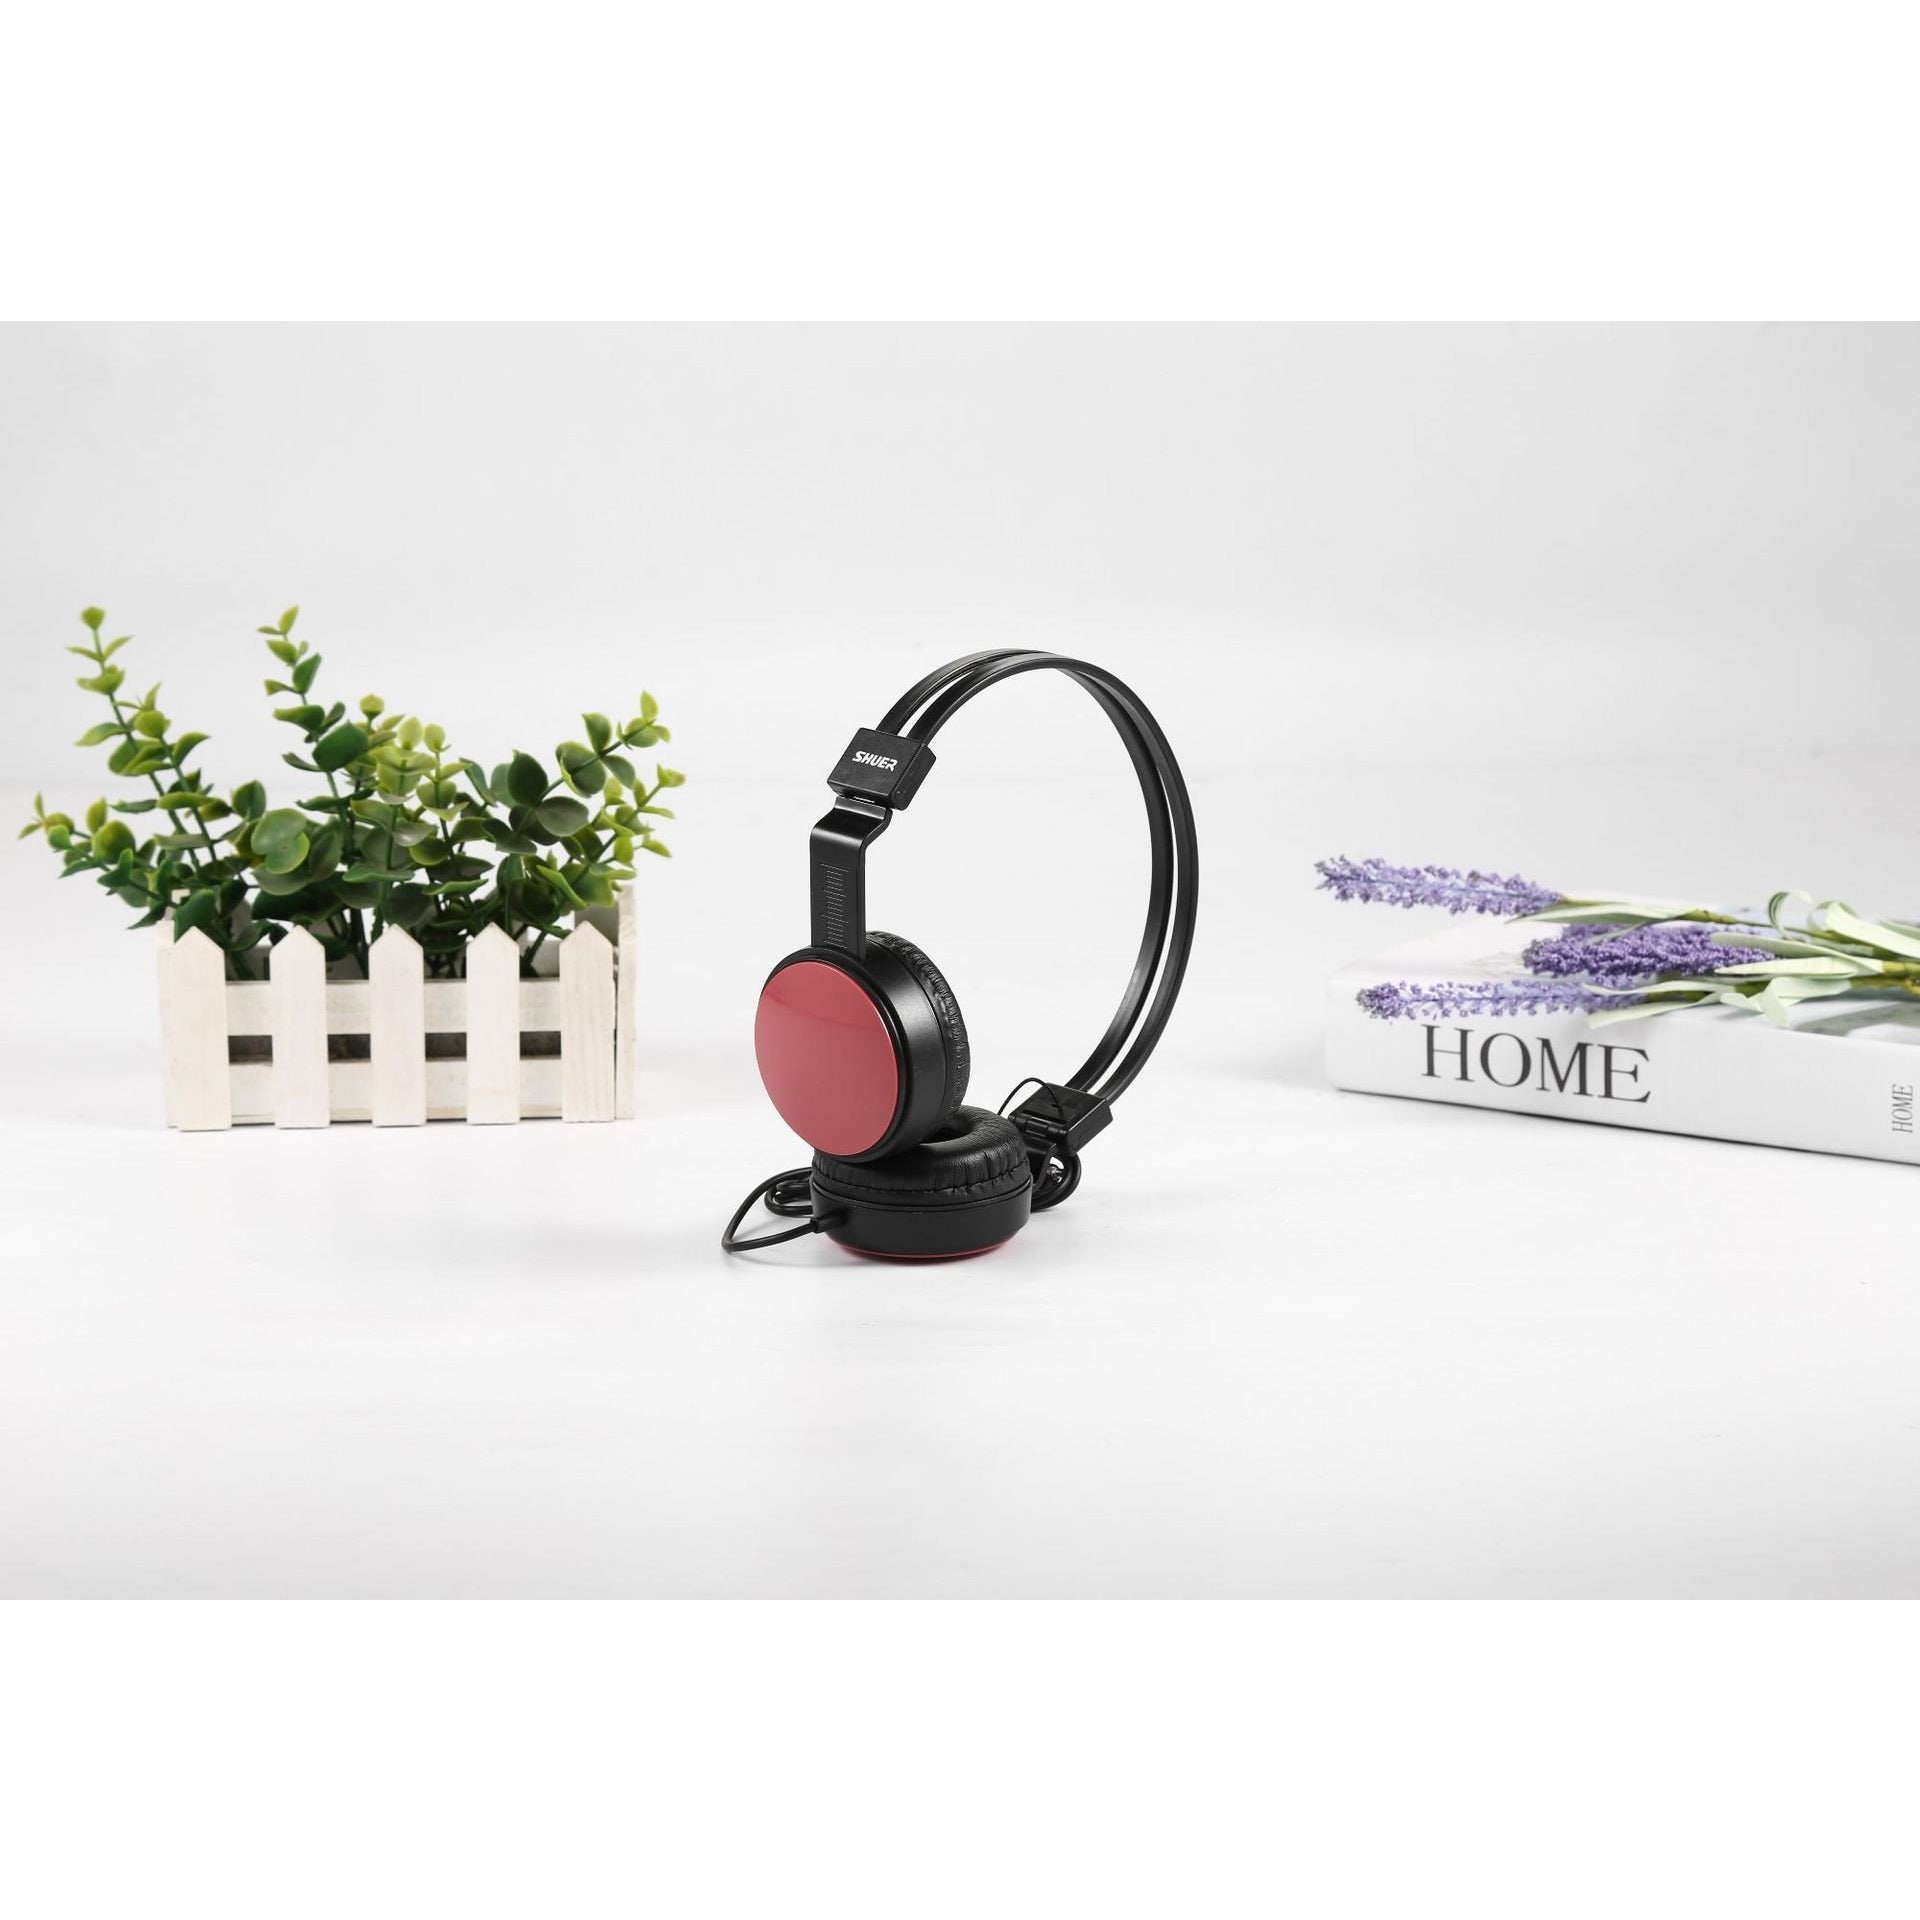 SHUER Foldable Headset with Microphone | Shopna Online Store .